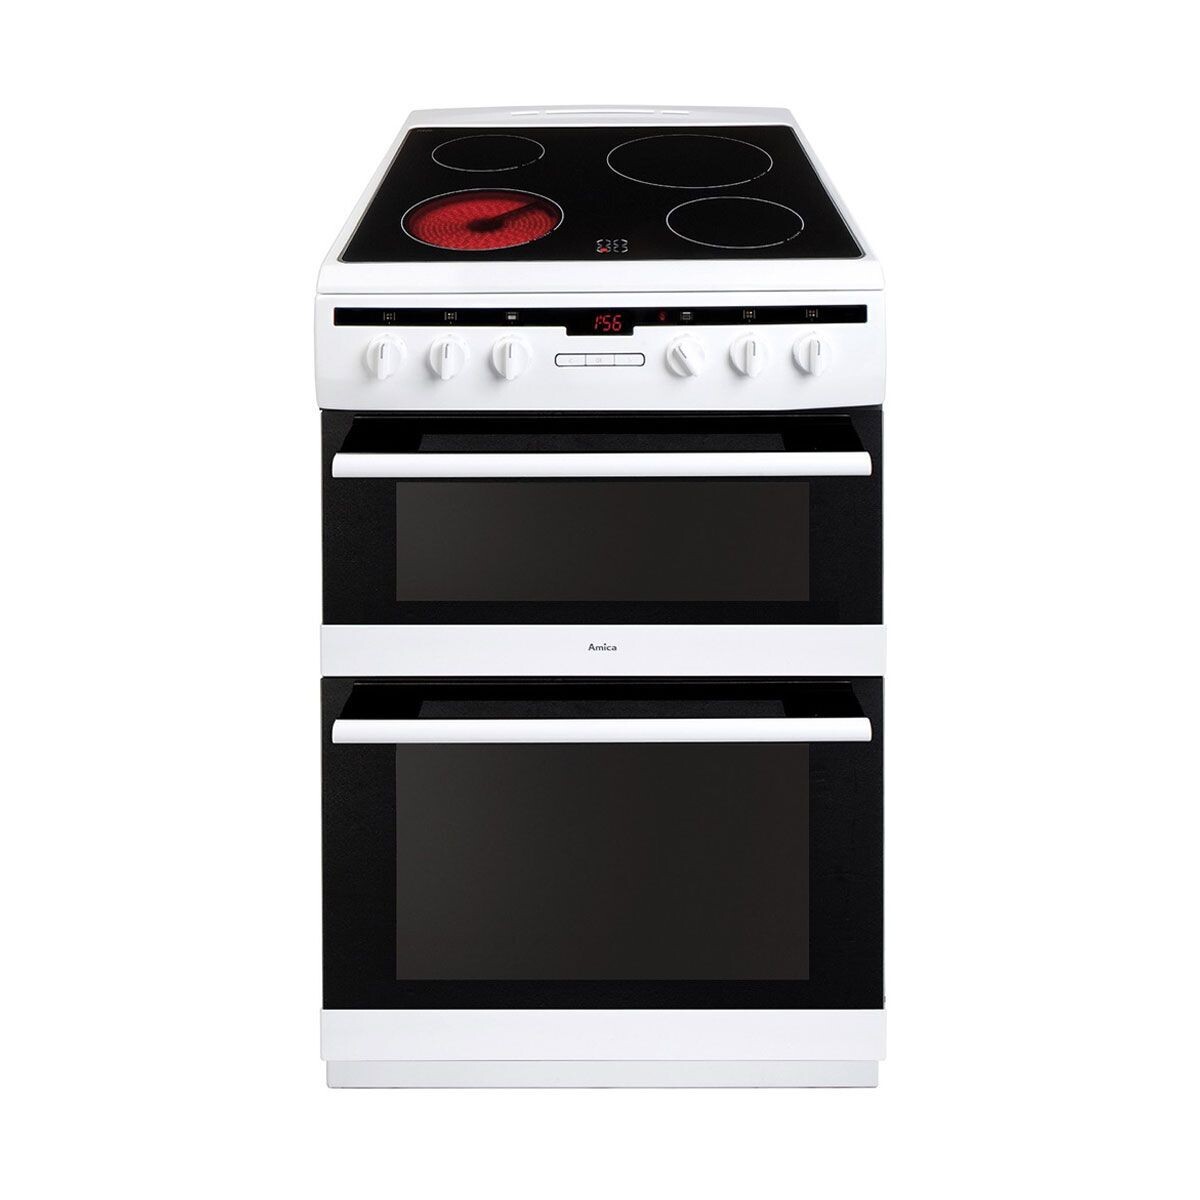 Amica AFC6550WH 60cm Electric Cooker with Ceramic Hob - White - A/A Rated - Brand New